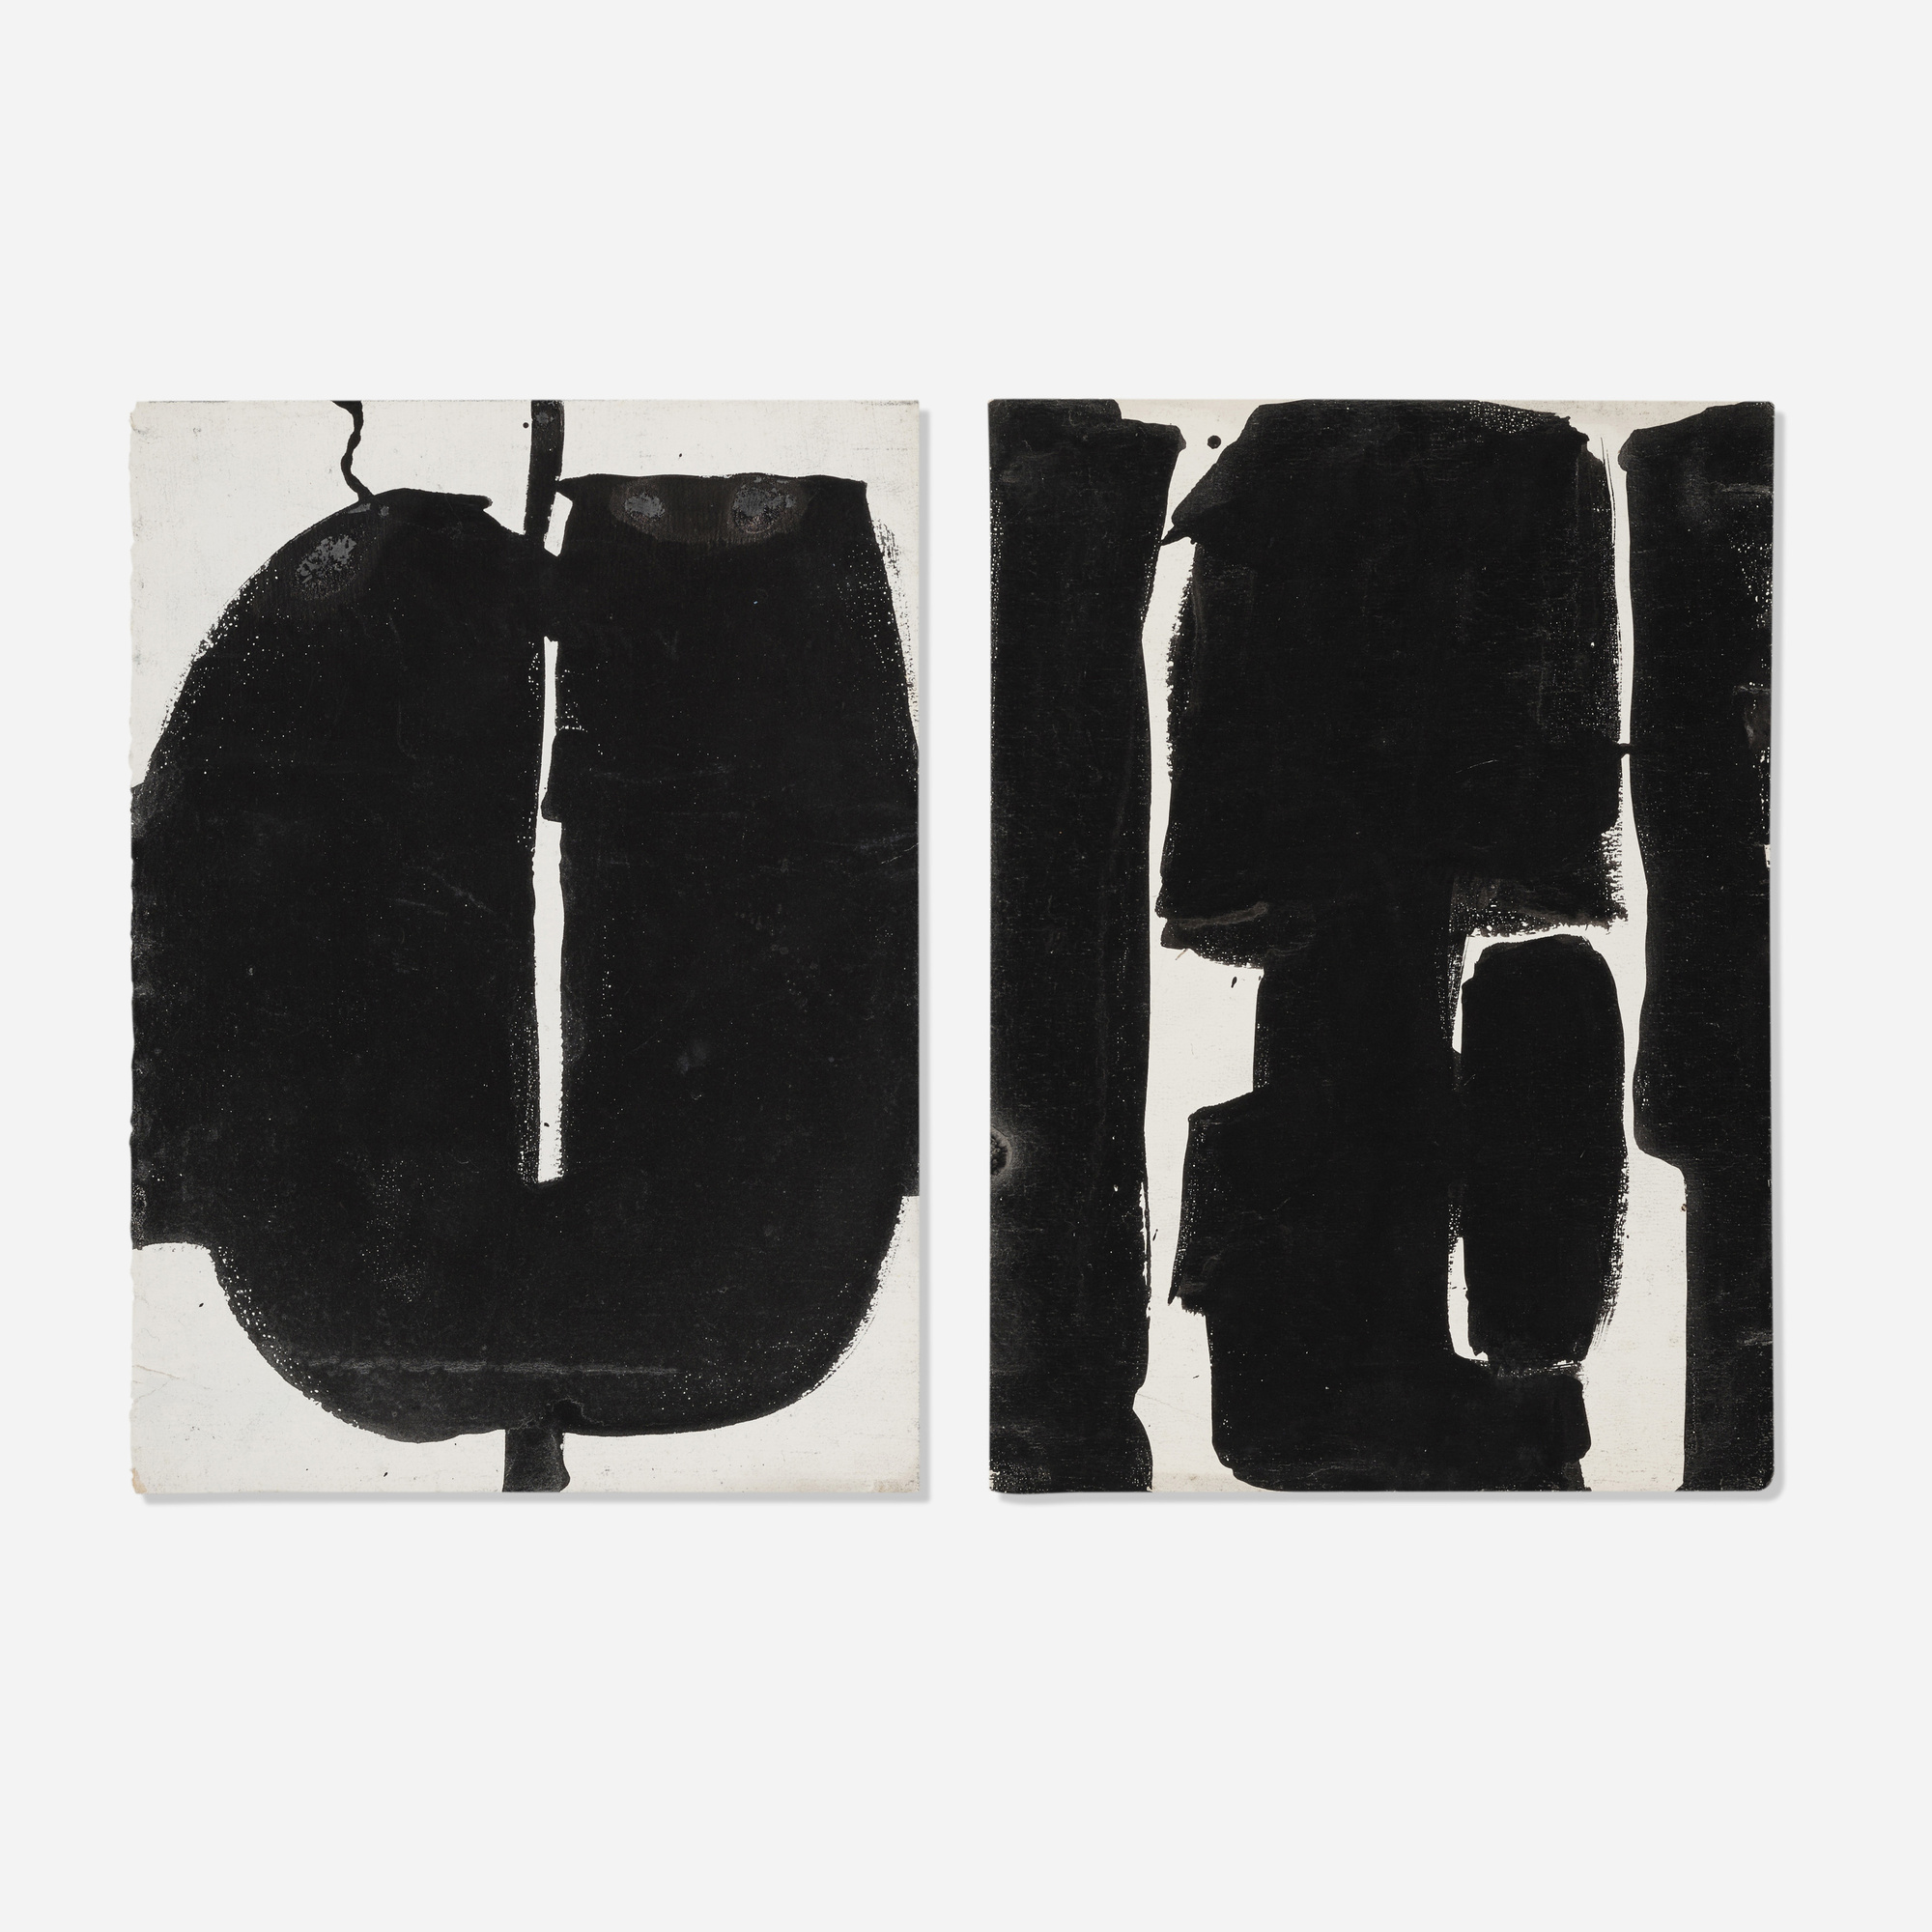 221: VACLAV VYTLACIL, Abstraction (two works) < 20|21 Art: The